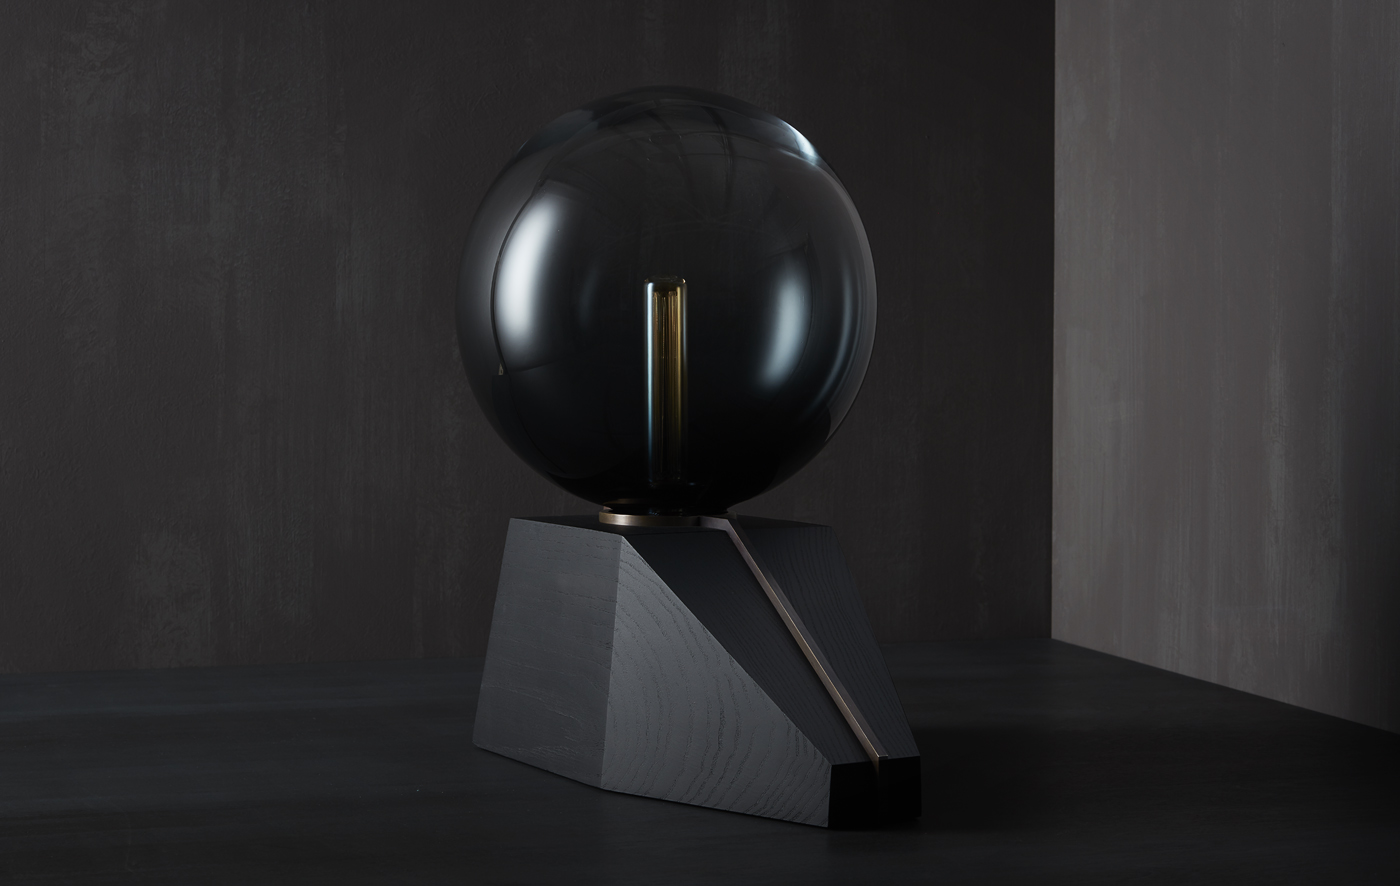 Table lamp with Murano glass globe, blackened ash base and bronze strap detail